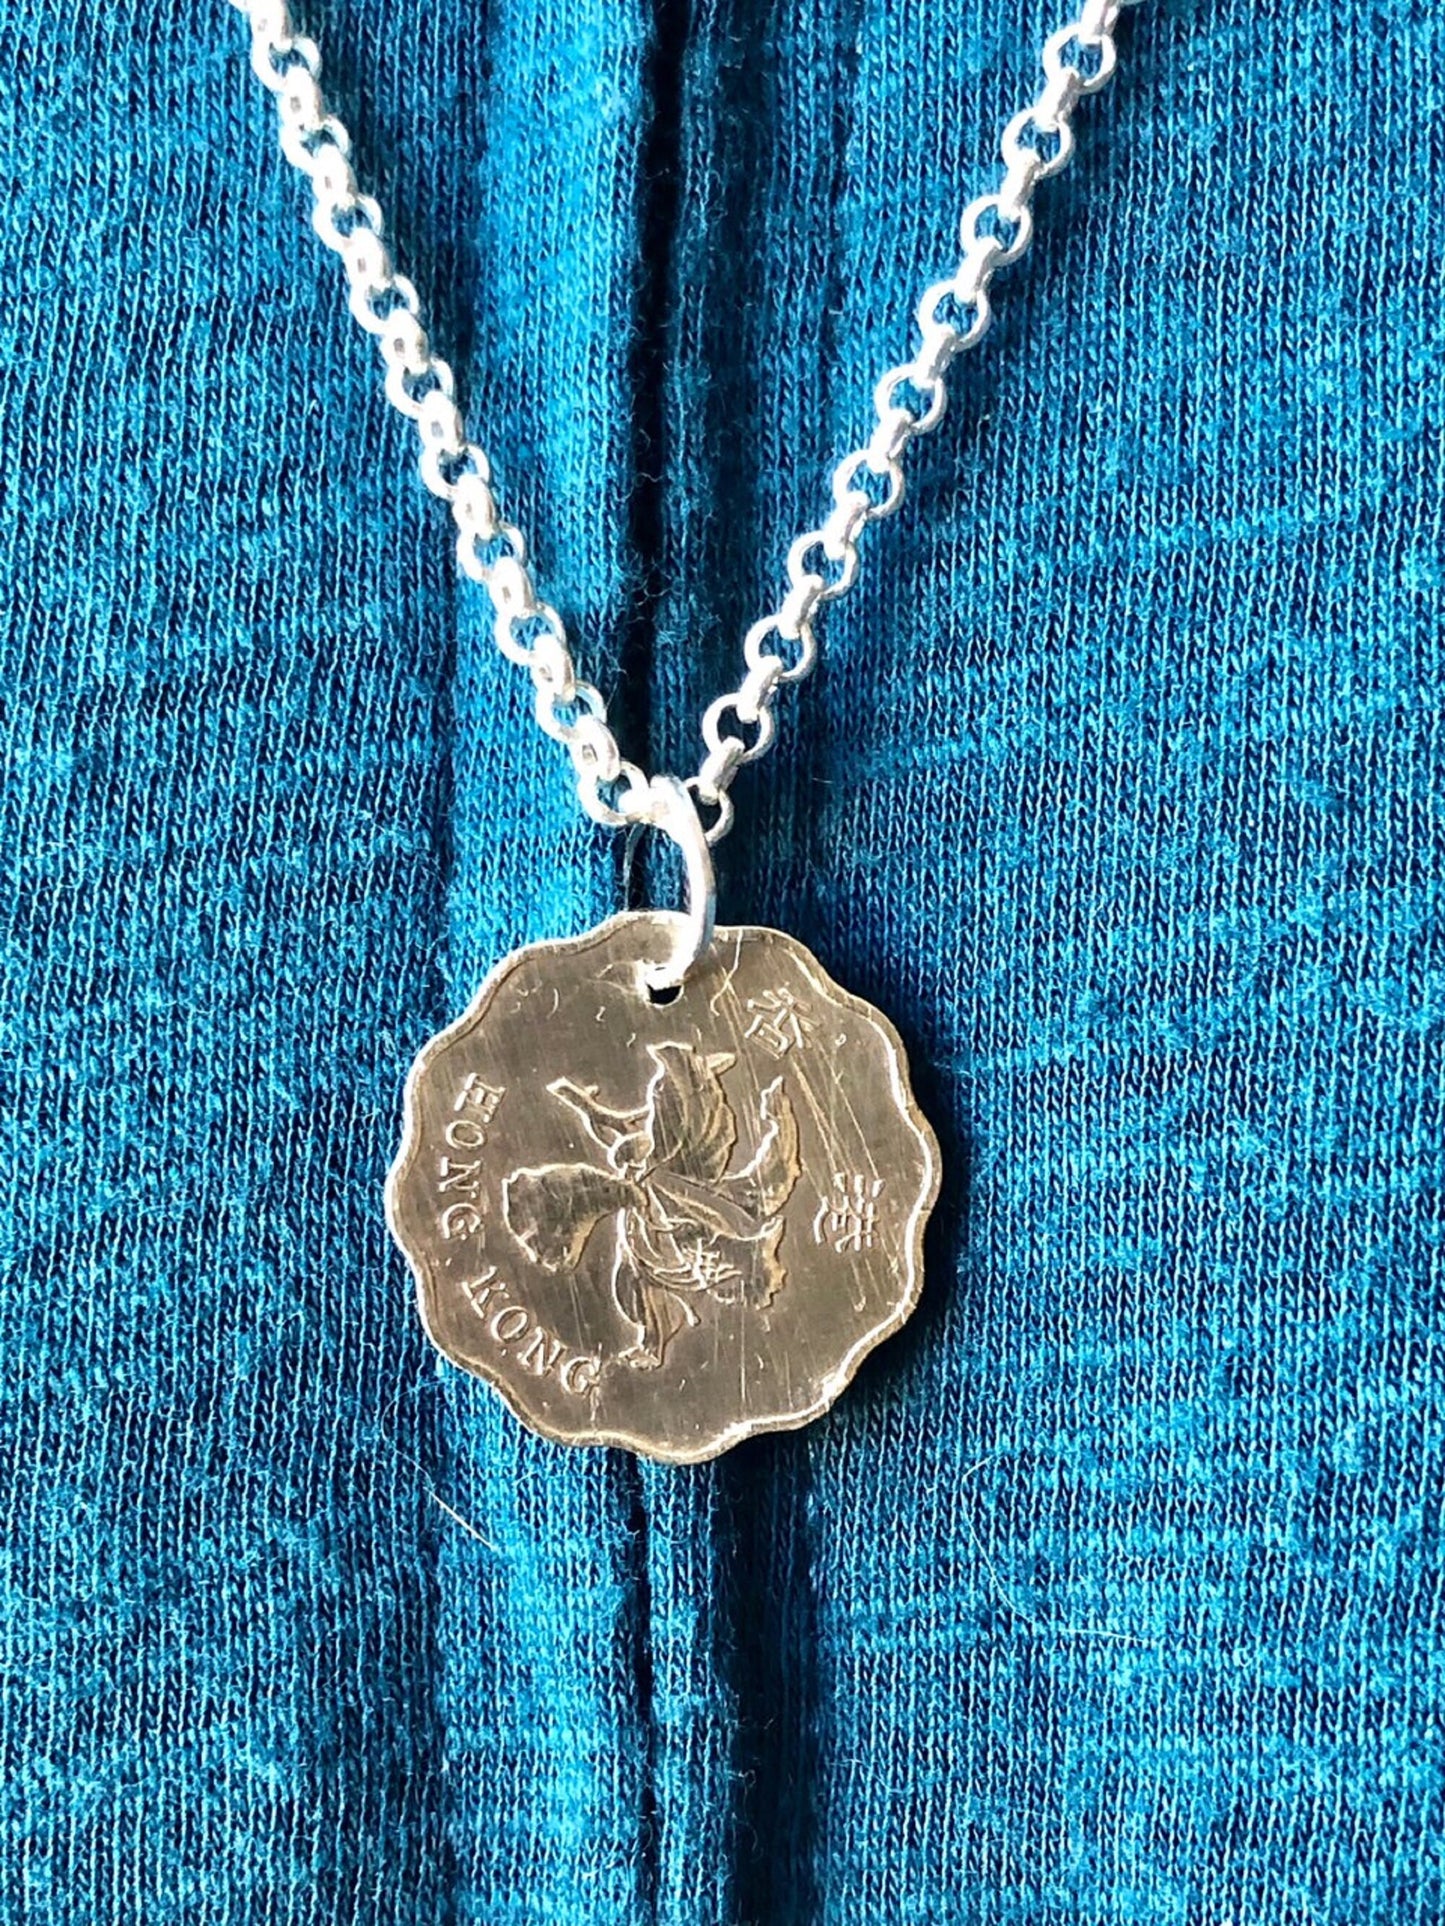 Hong Kong Pendant Coin Necklace 20 Cents China Chinese Custom Made Vintage and Rare coins - Coin Enthusiast - Fashion Gift Accessory.